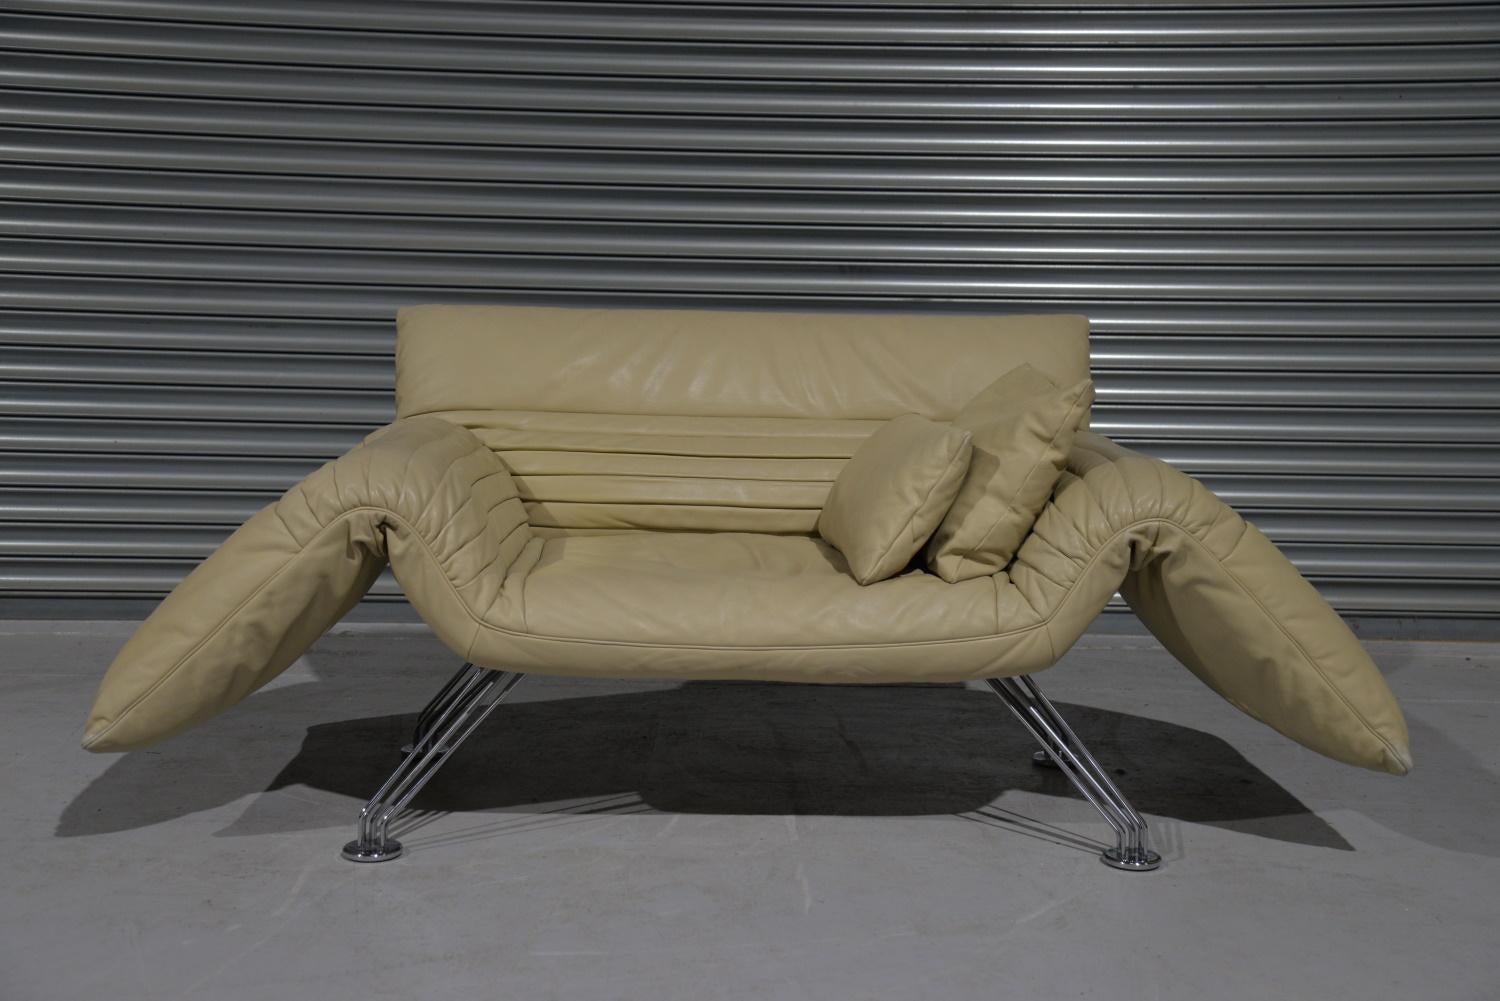 We are delighted to bring to you an ultra rare and multifunctional De Sede DS 142 designed by Winfried Totzek in 1988. With individually adjustable armrests and backrest, this makes it also possible to use this sofa as a chaise longue. Hand built